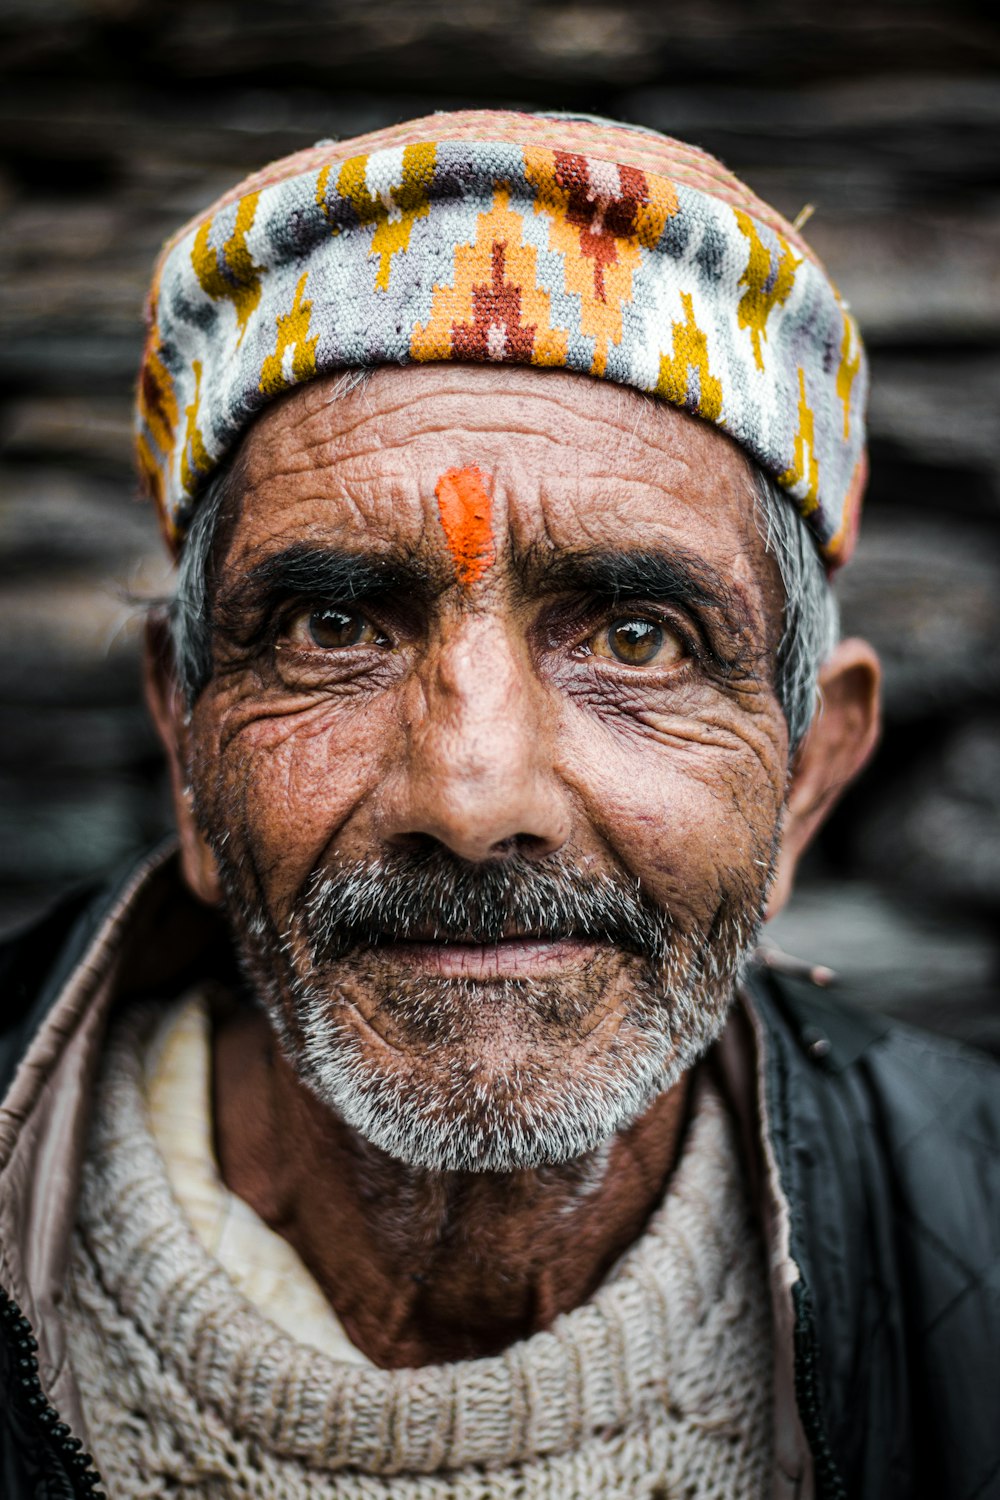 an old man with a colorful turban on his head